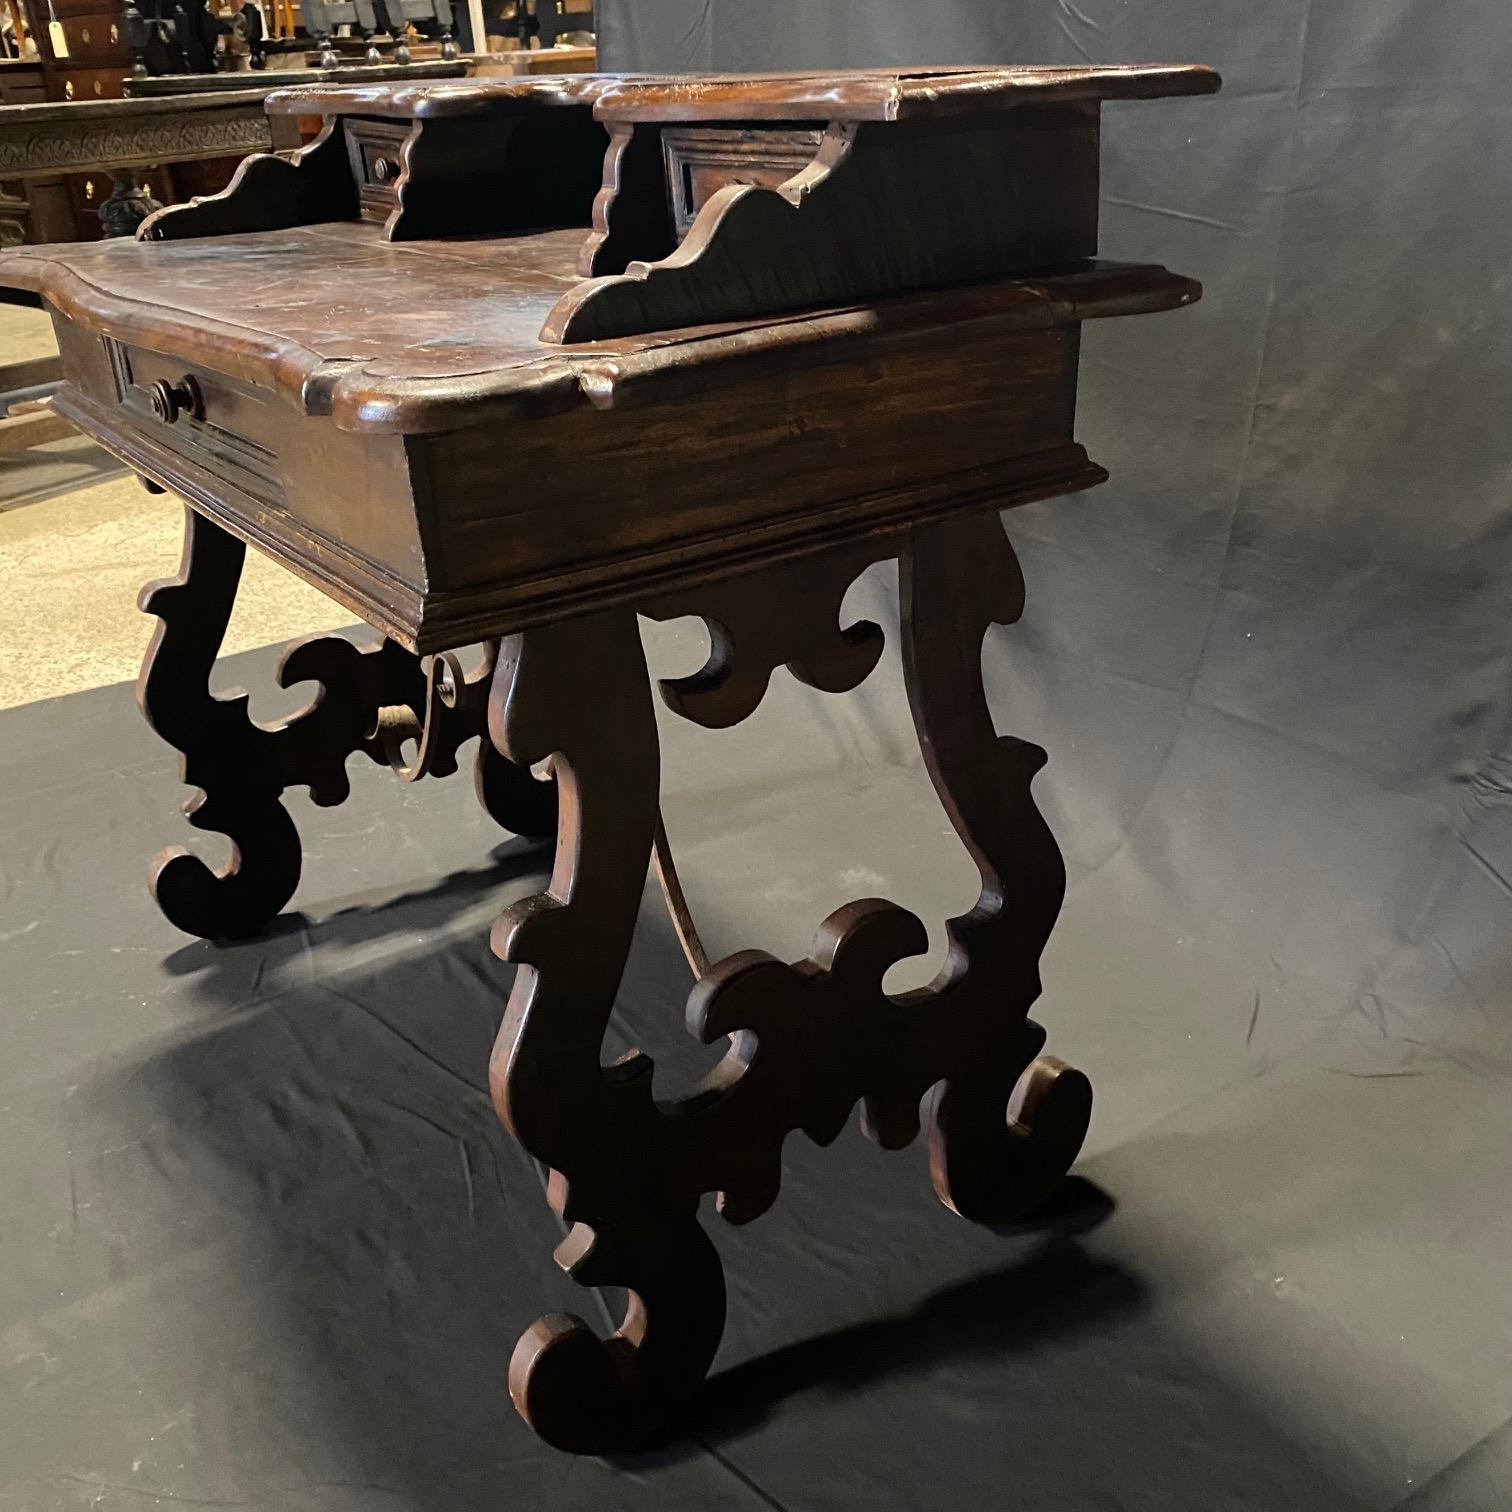 Early 19th Century Italian Baroque Carved Walnut Writing Desk with Lyre Base For Sale